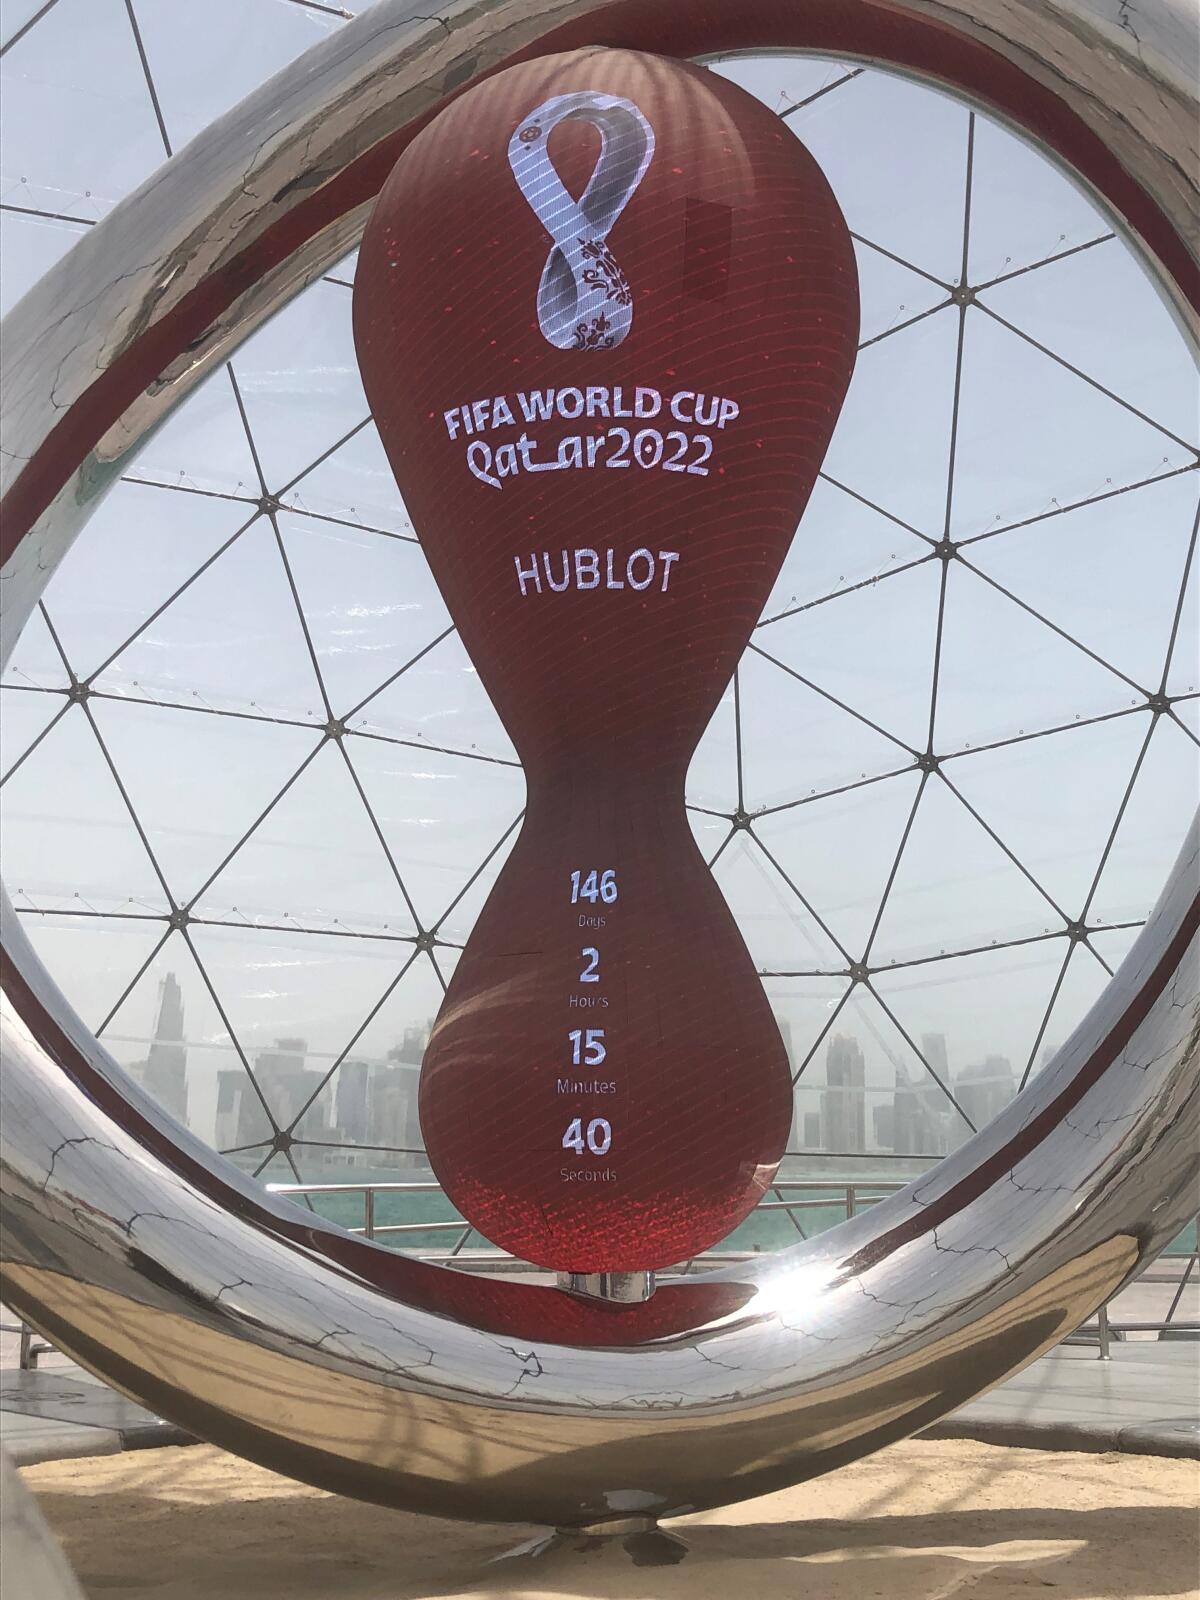 A clock in Doha, Qatar, counts down the days until it hosts the next FIFA World Cup.